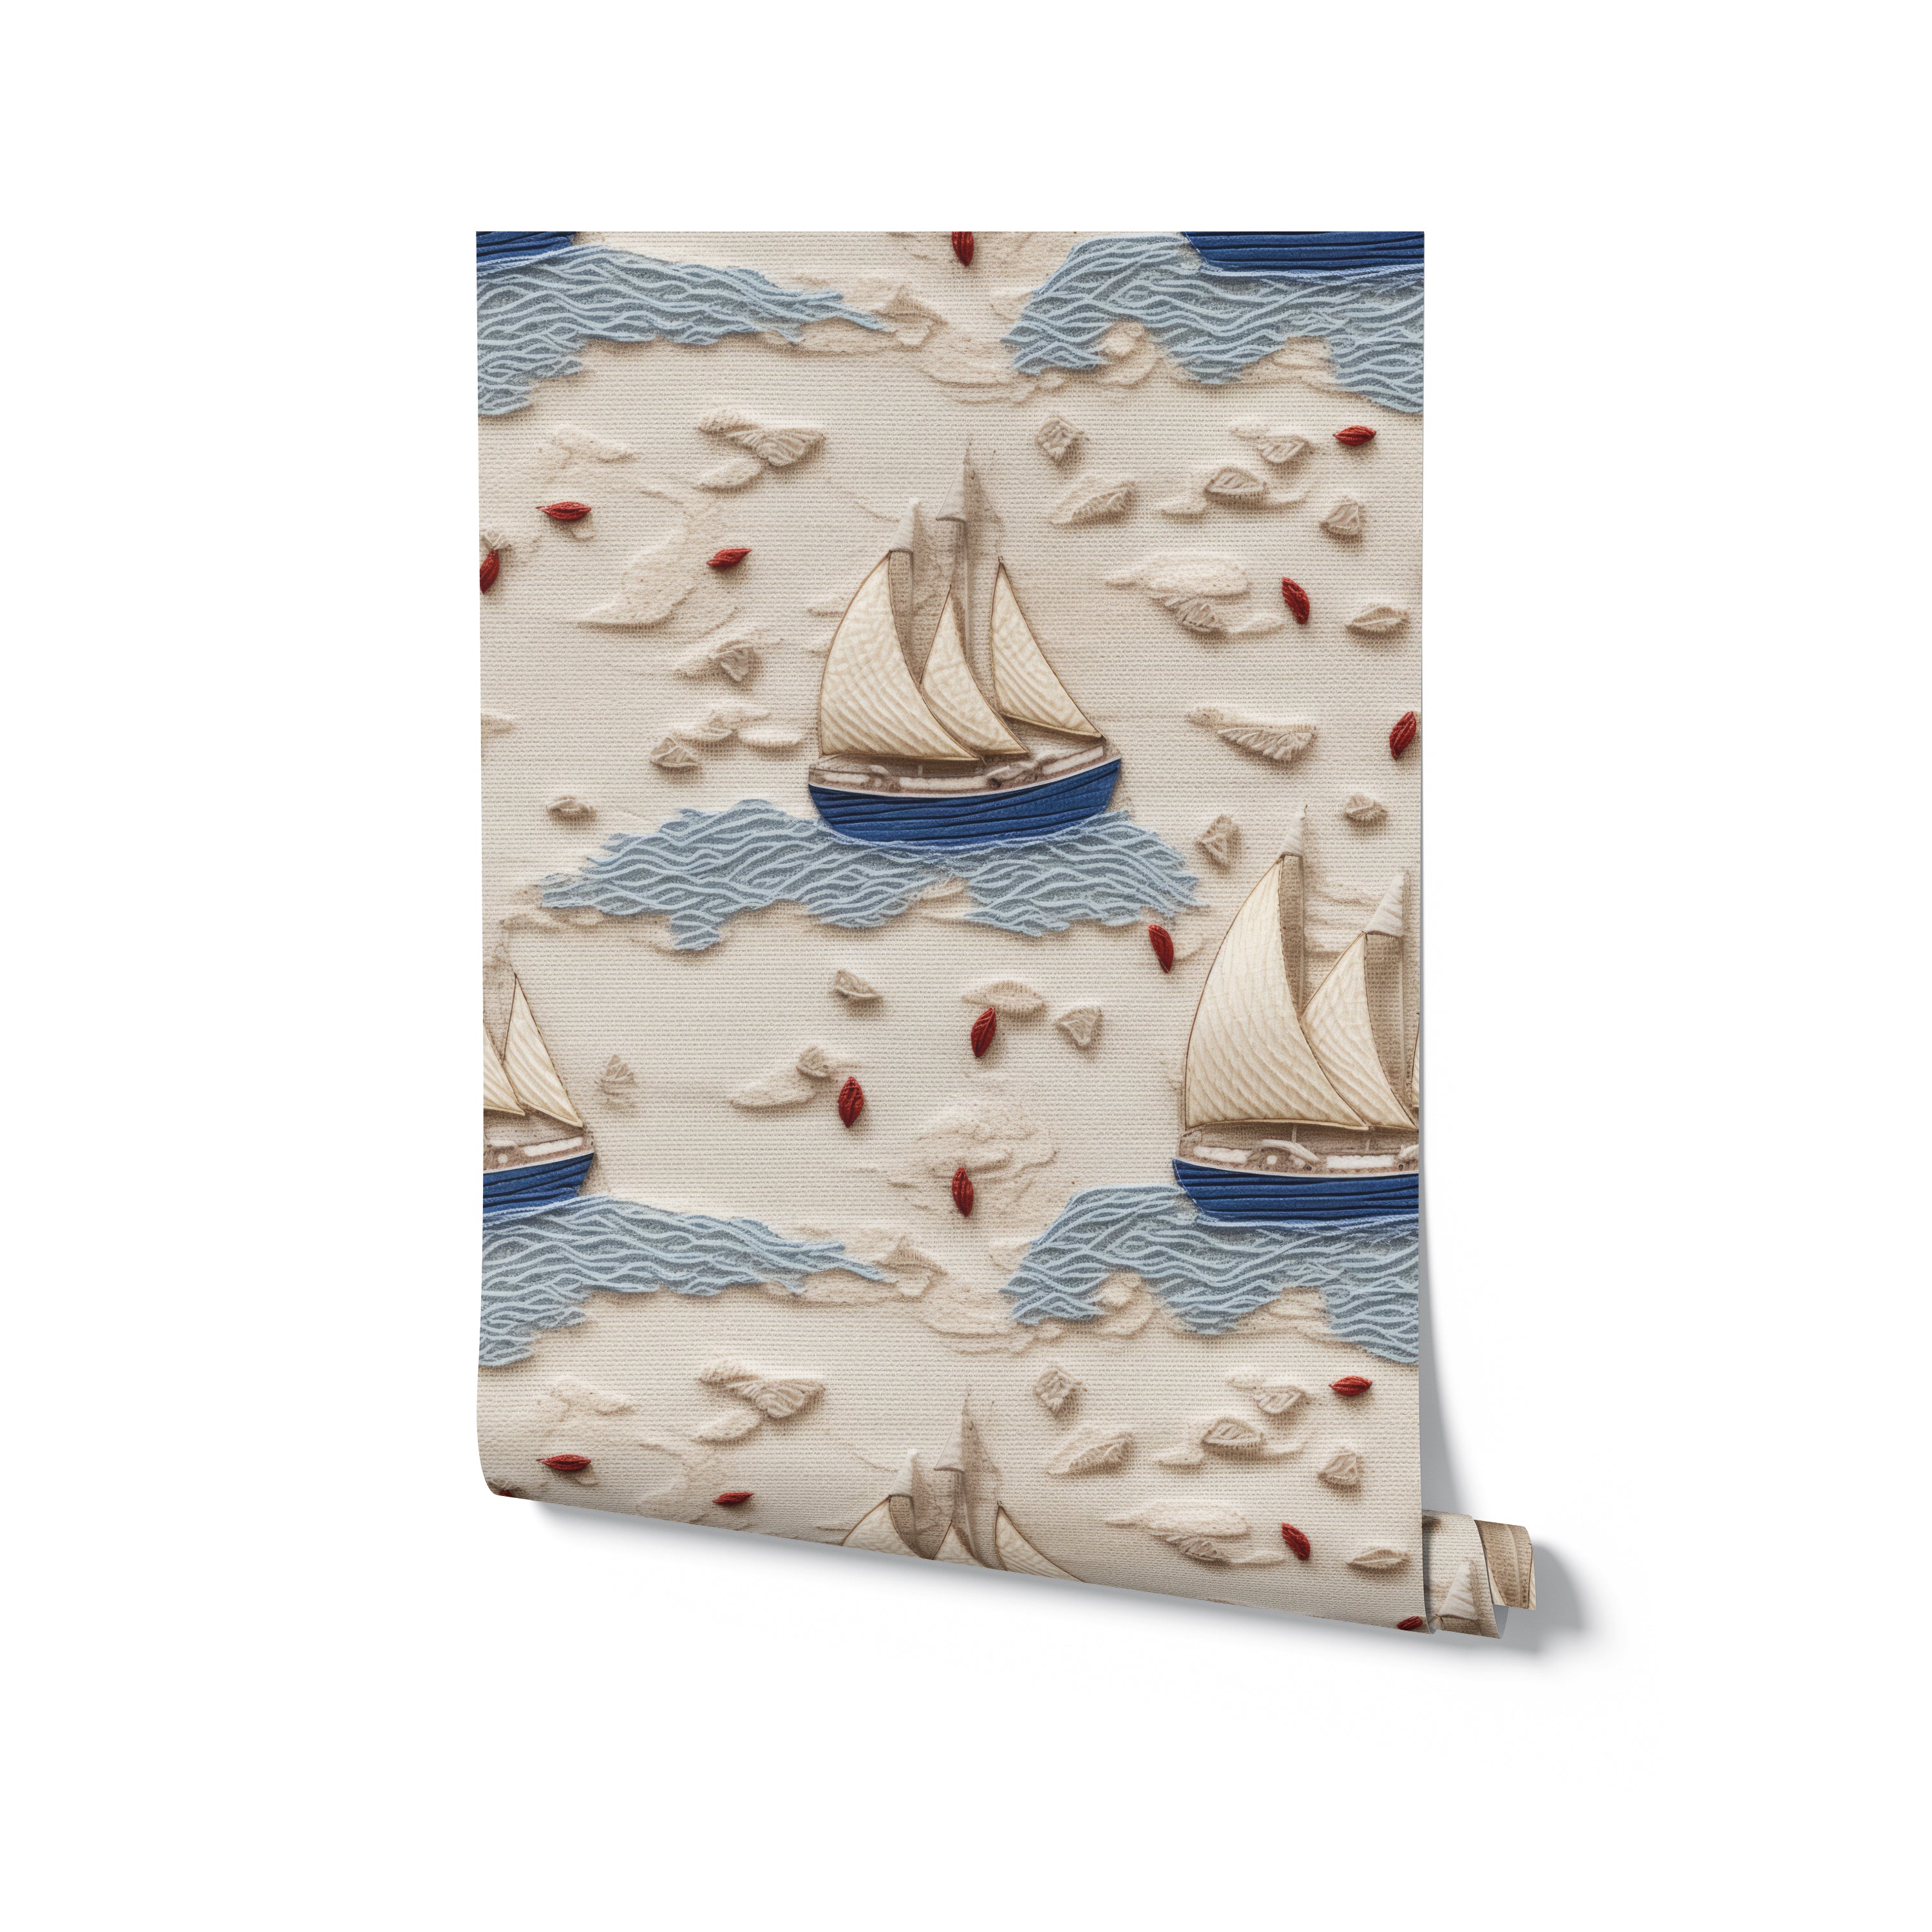 A roll of Coastal Charm Wallpaper featuring a charming pattern of sailboats navigating through blue waves, with delicate red leaves enhancing the maritime theme, perfect for infusing any room with coastal elegance.